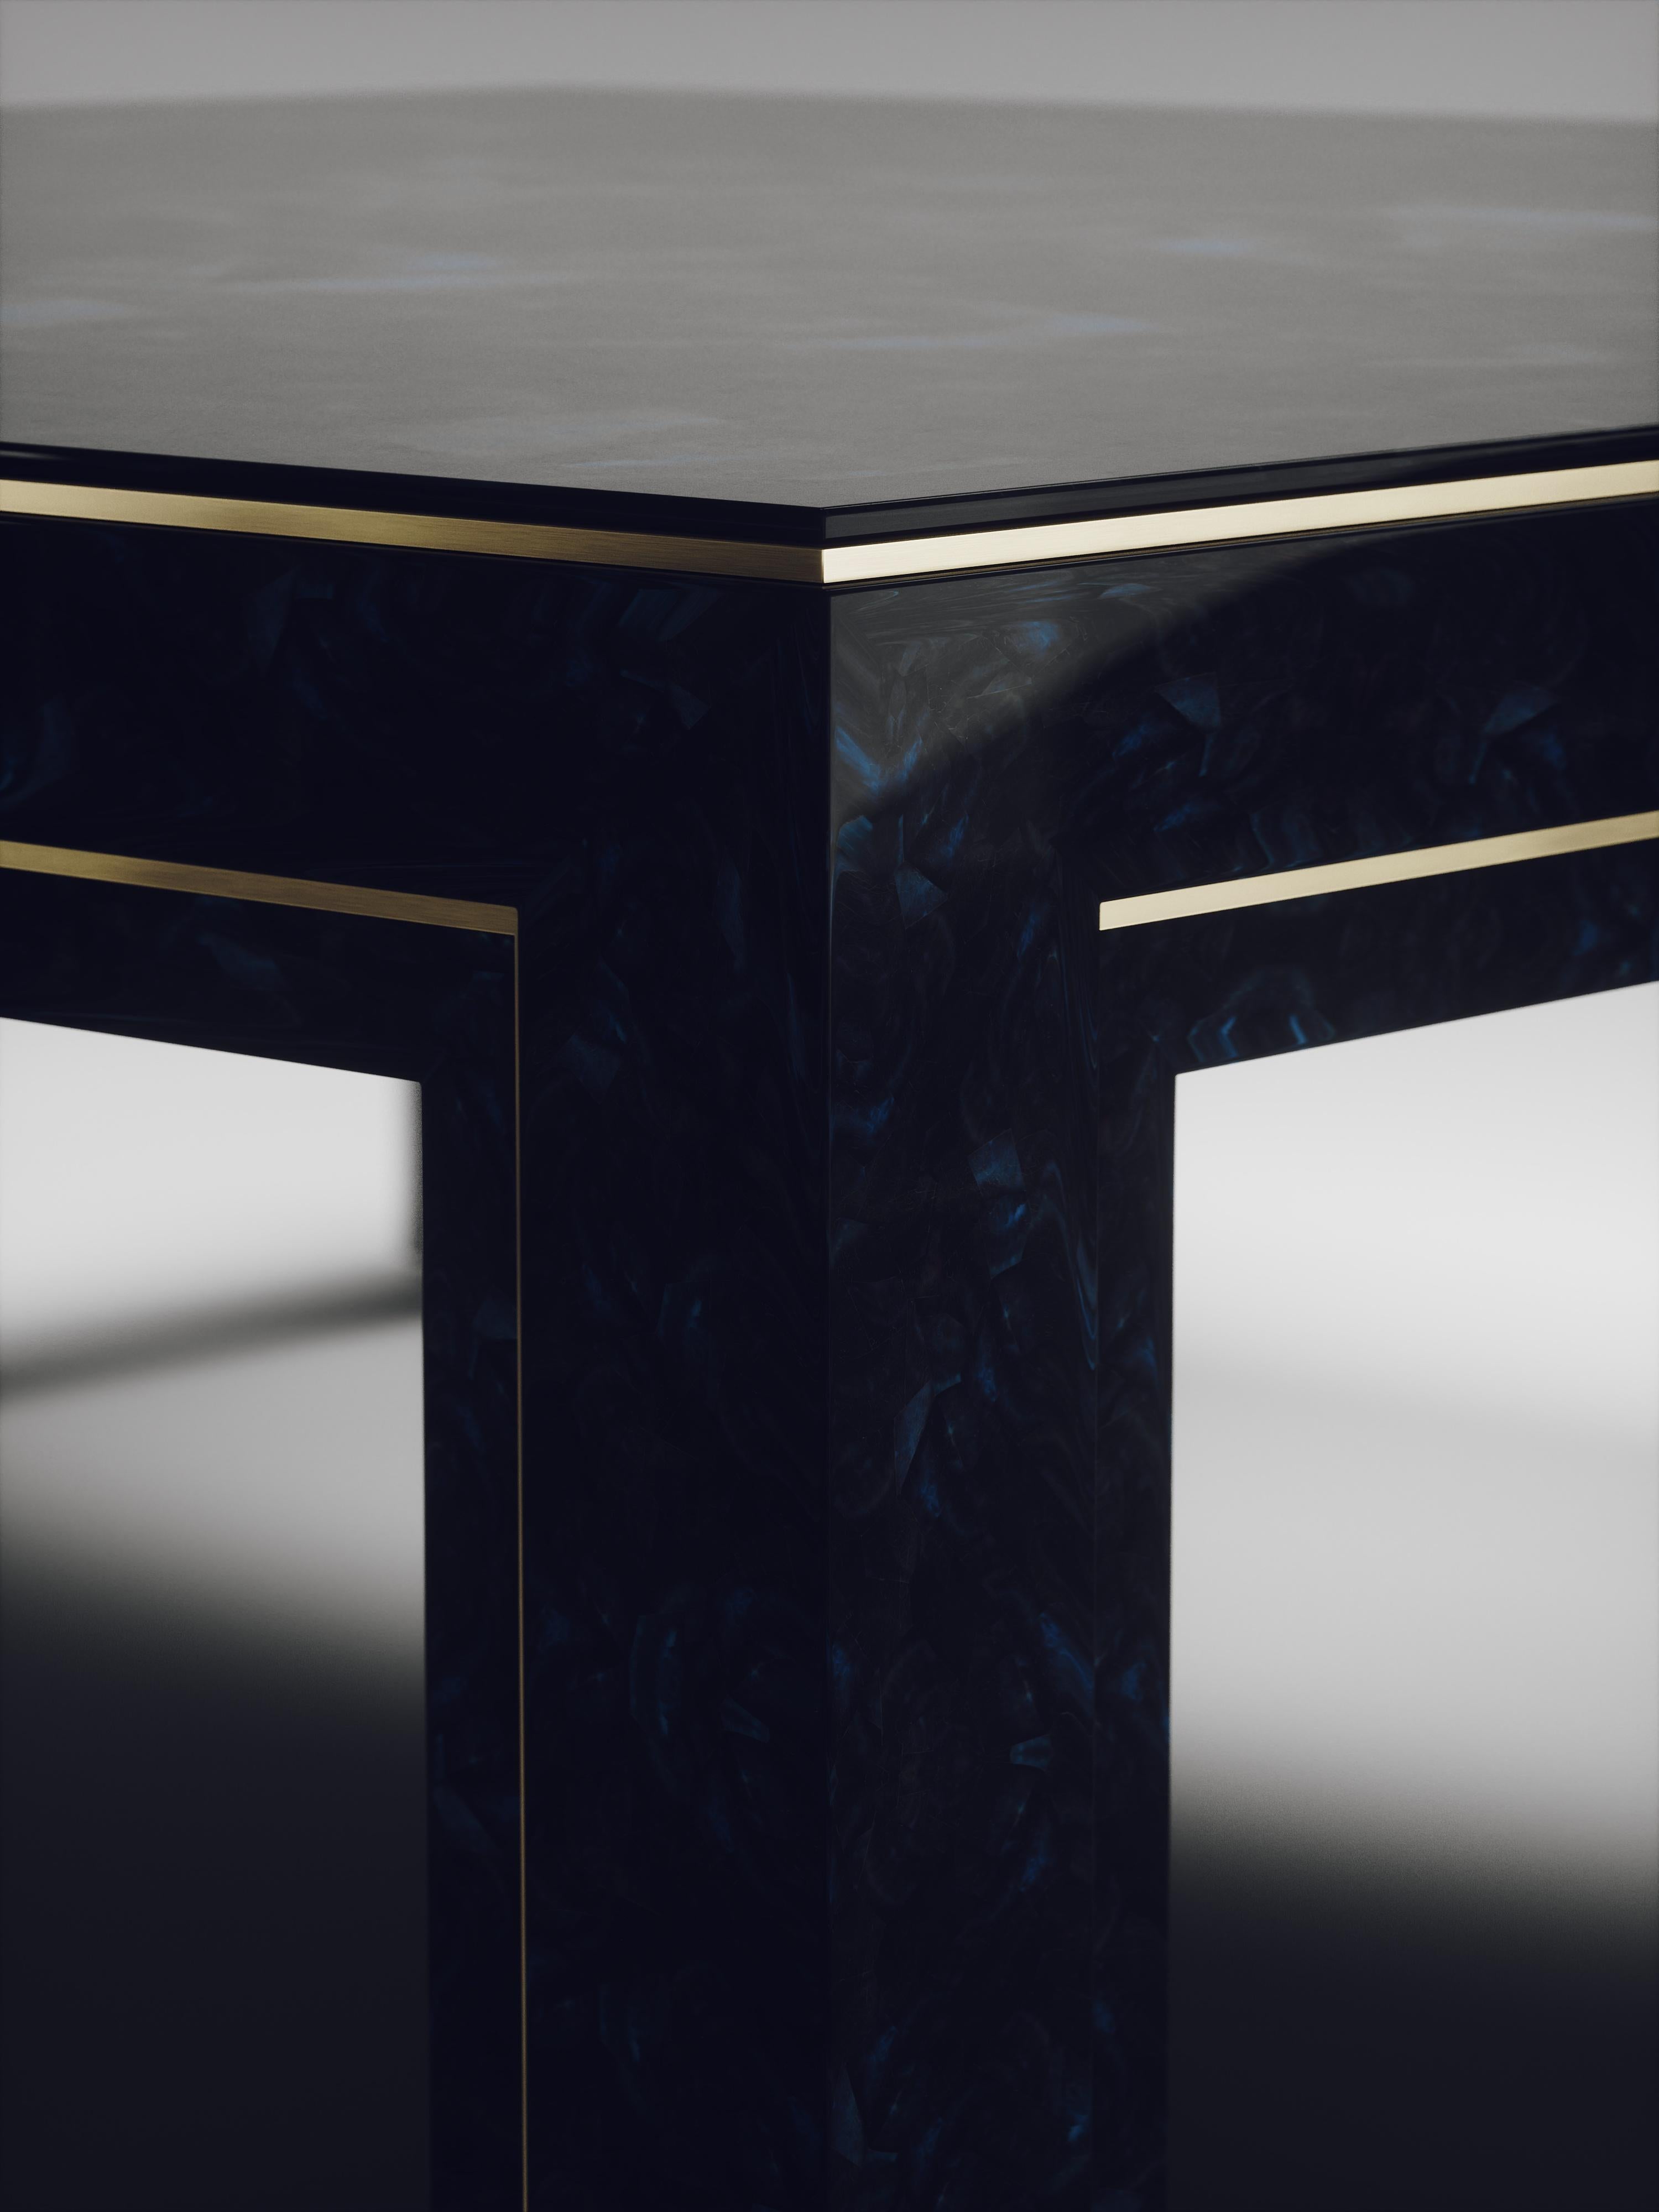 The parsons coffee table by R&Y Augousti is classic and elegant staple piece for your home. The clean lines of the overall piece, inlaid in blue pen shell, are accentuated by the discreet bronze-patina brass indentation detail giving it a luxurious